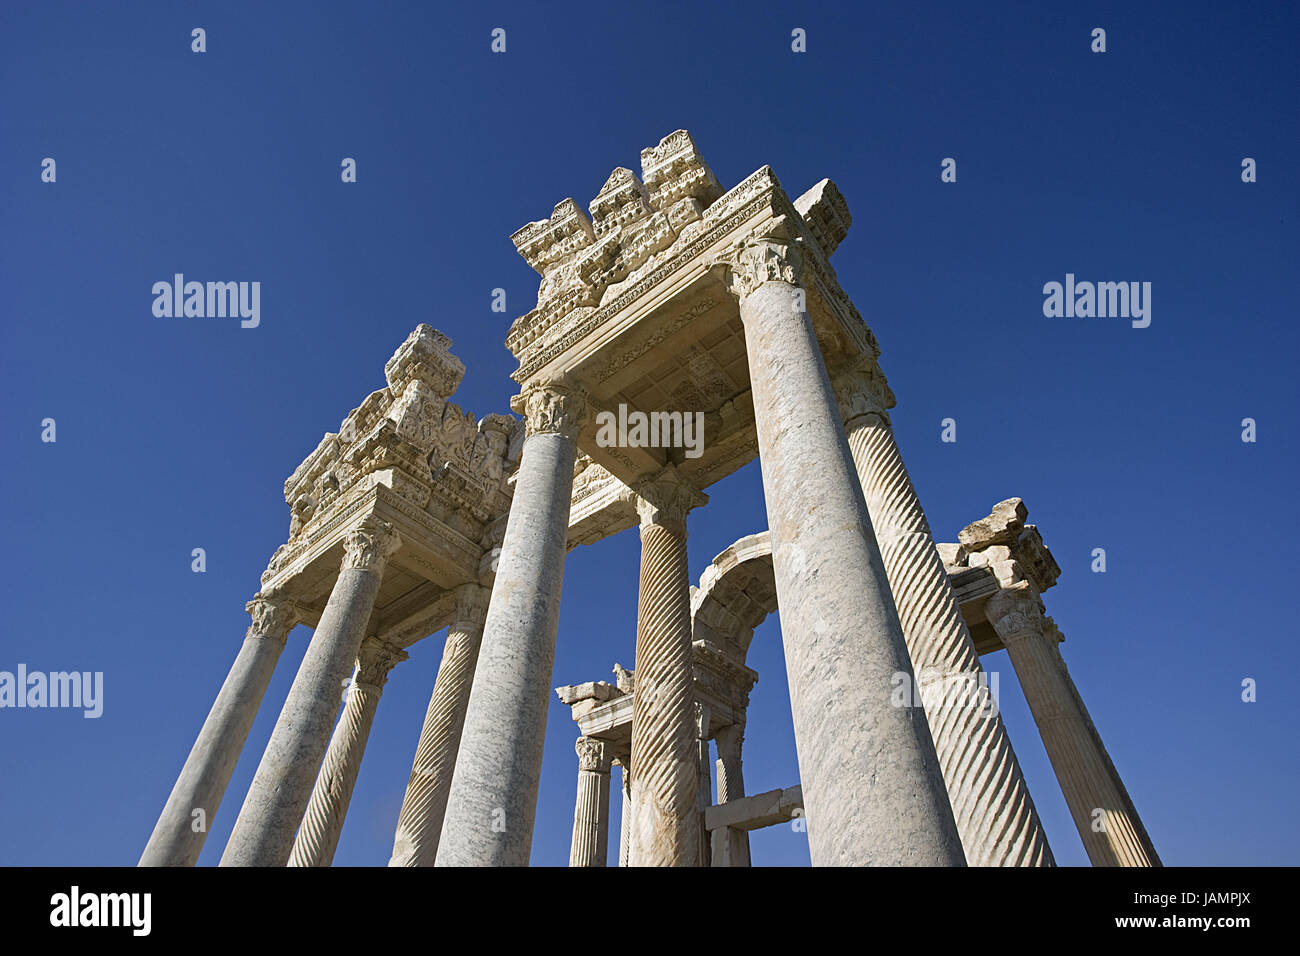 Turkey,Aphrodisias,Tetrapylon,detail,perspective,Anatolia,place of interest,north south street,gate,goal building,propylon,building,architecture,structure,antique,historically,destroys,ruin,remains,culture,story,antiquity,gable,relief,architecture,deserted,pillars,heavens,blue,cloudless, Stock Photo